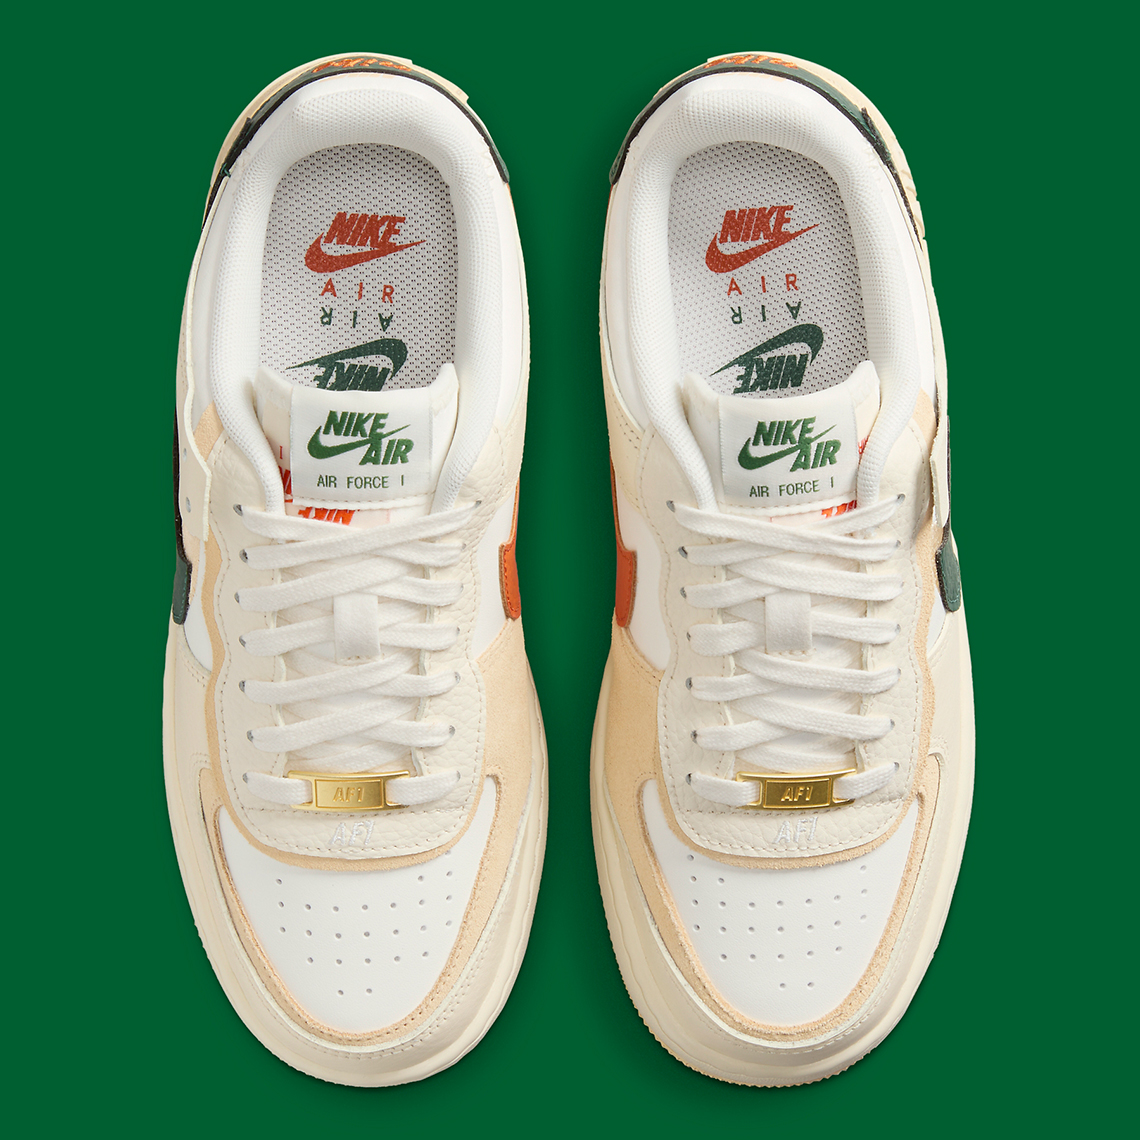 Nike SB have expanded the Shadow Sail Vintage Green Orange Fq2764 100 8